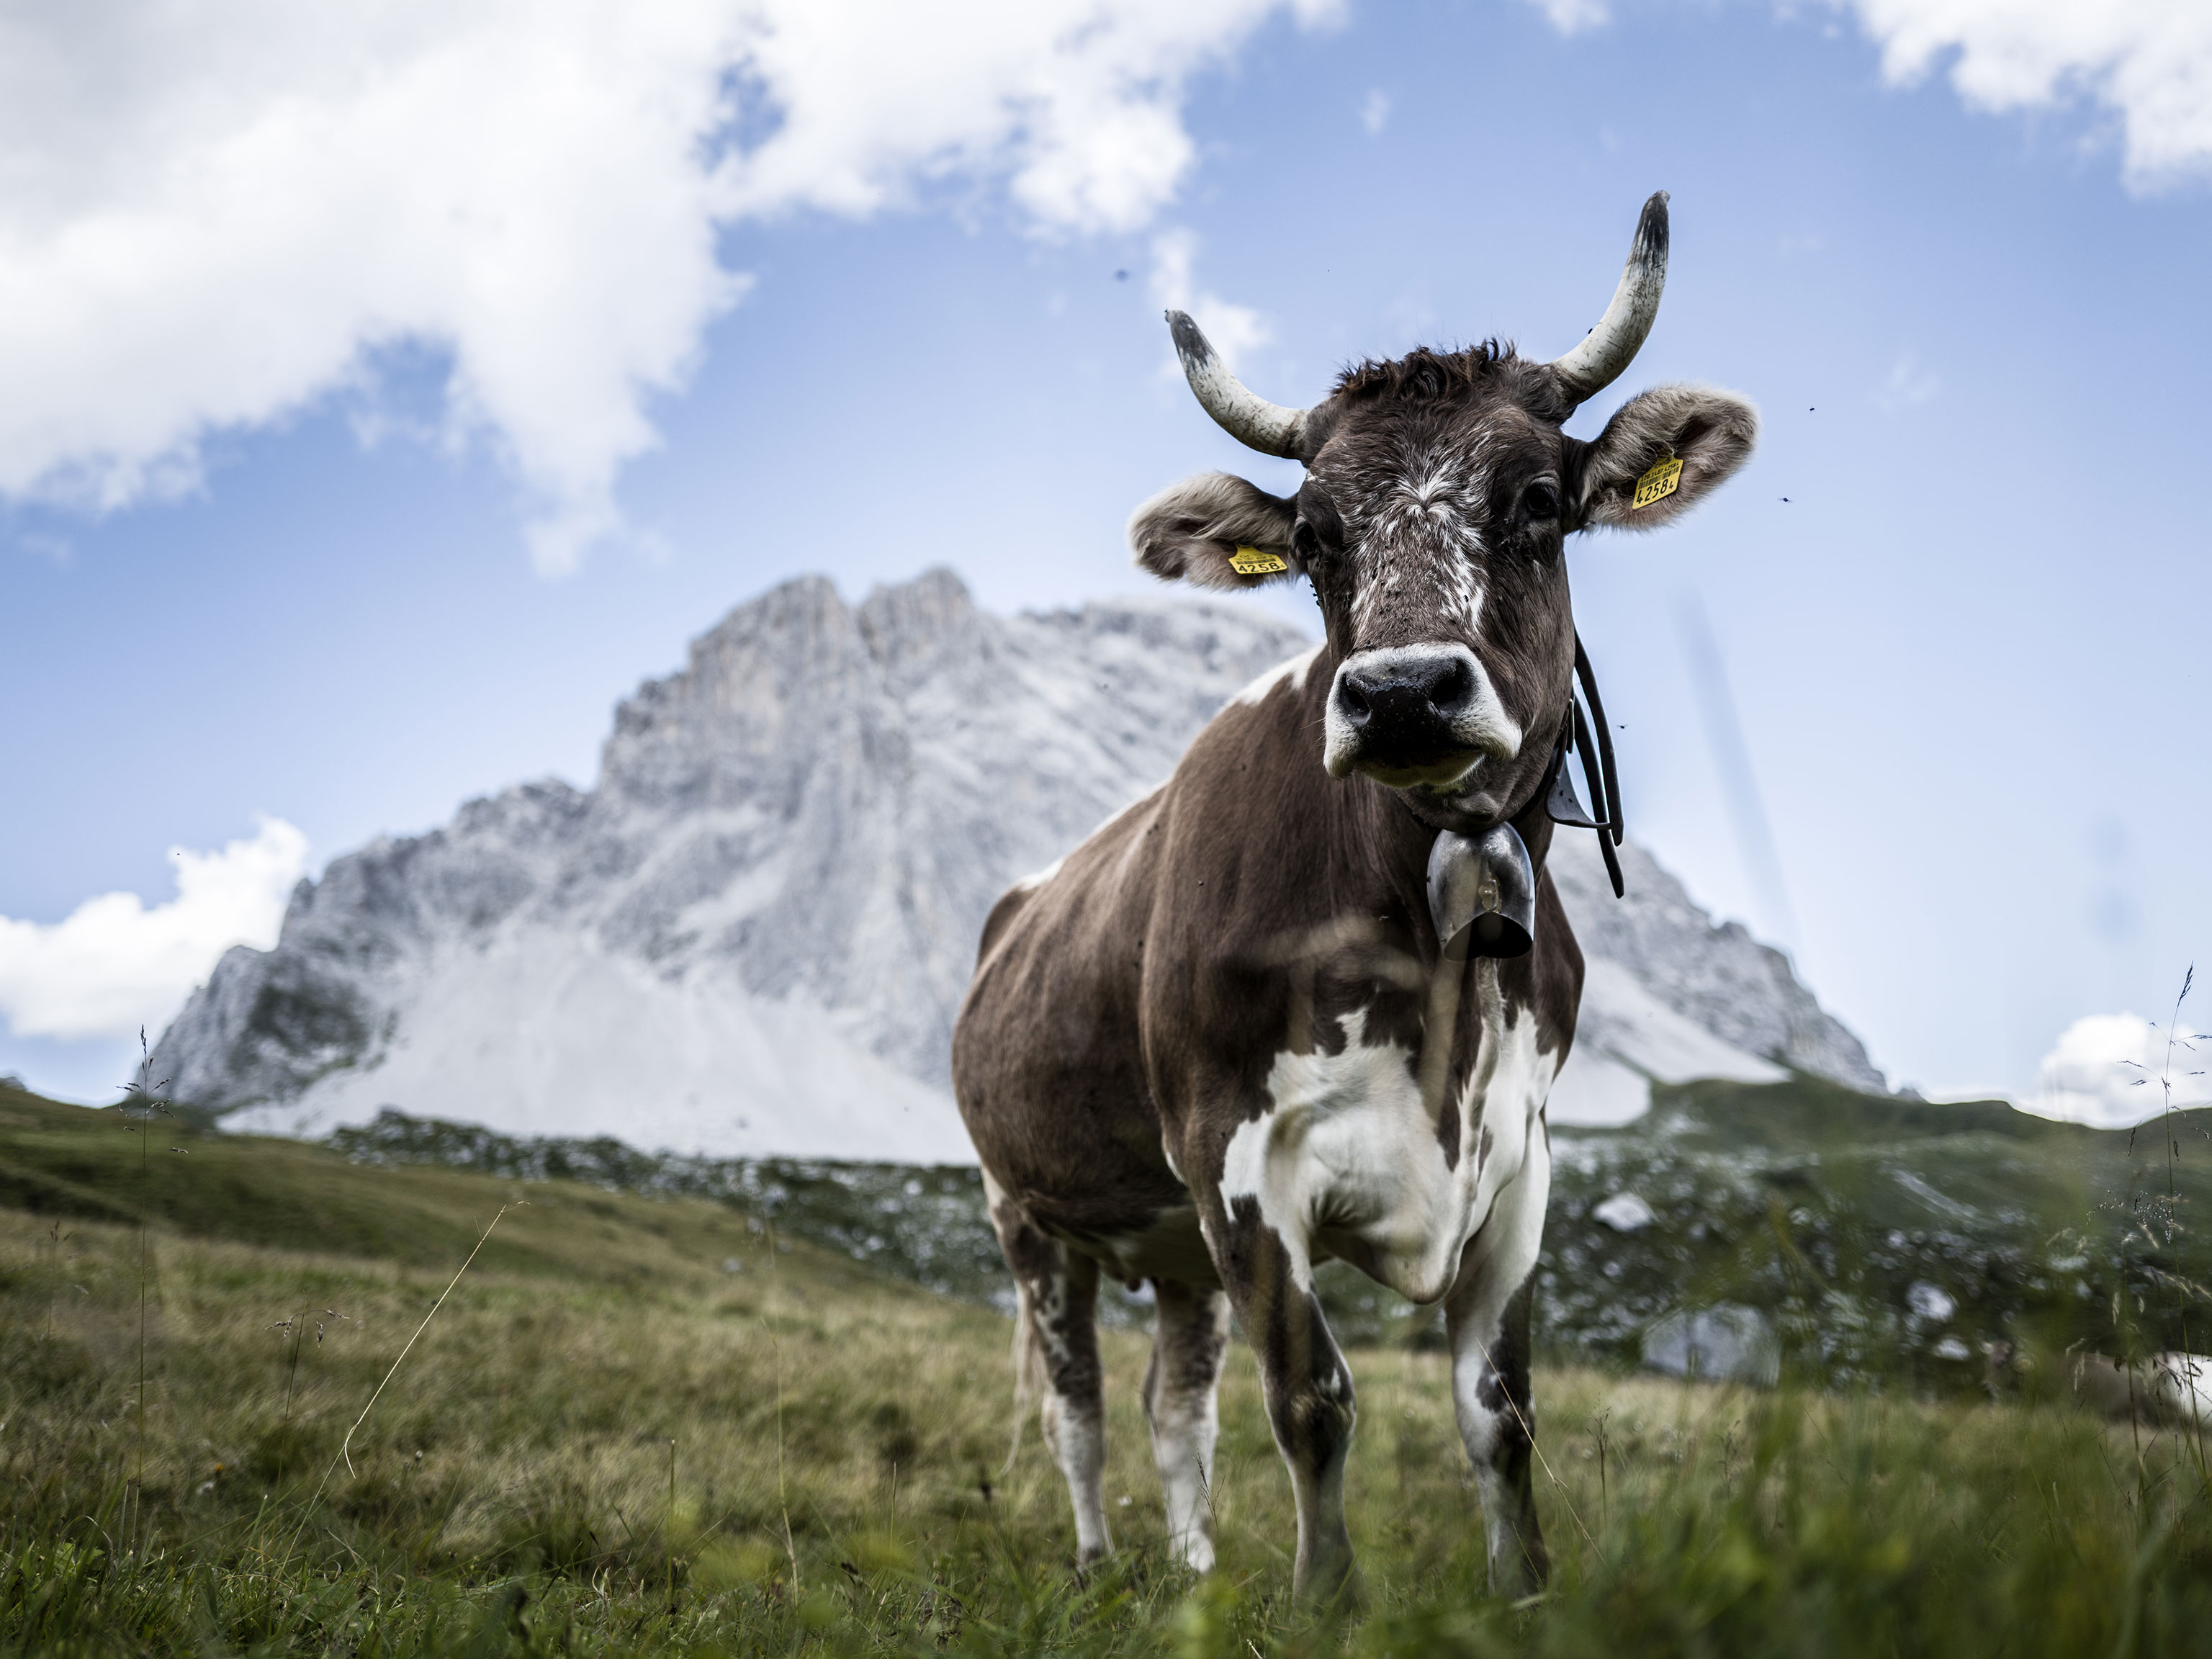 A cow standing in front of an impressive craggy peak